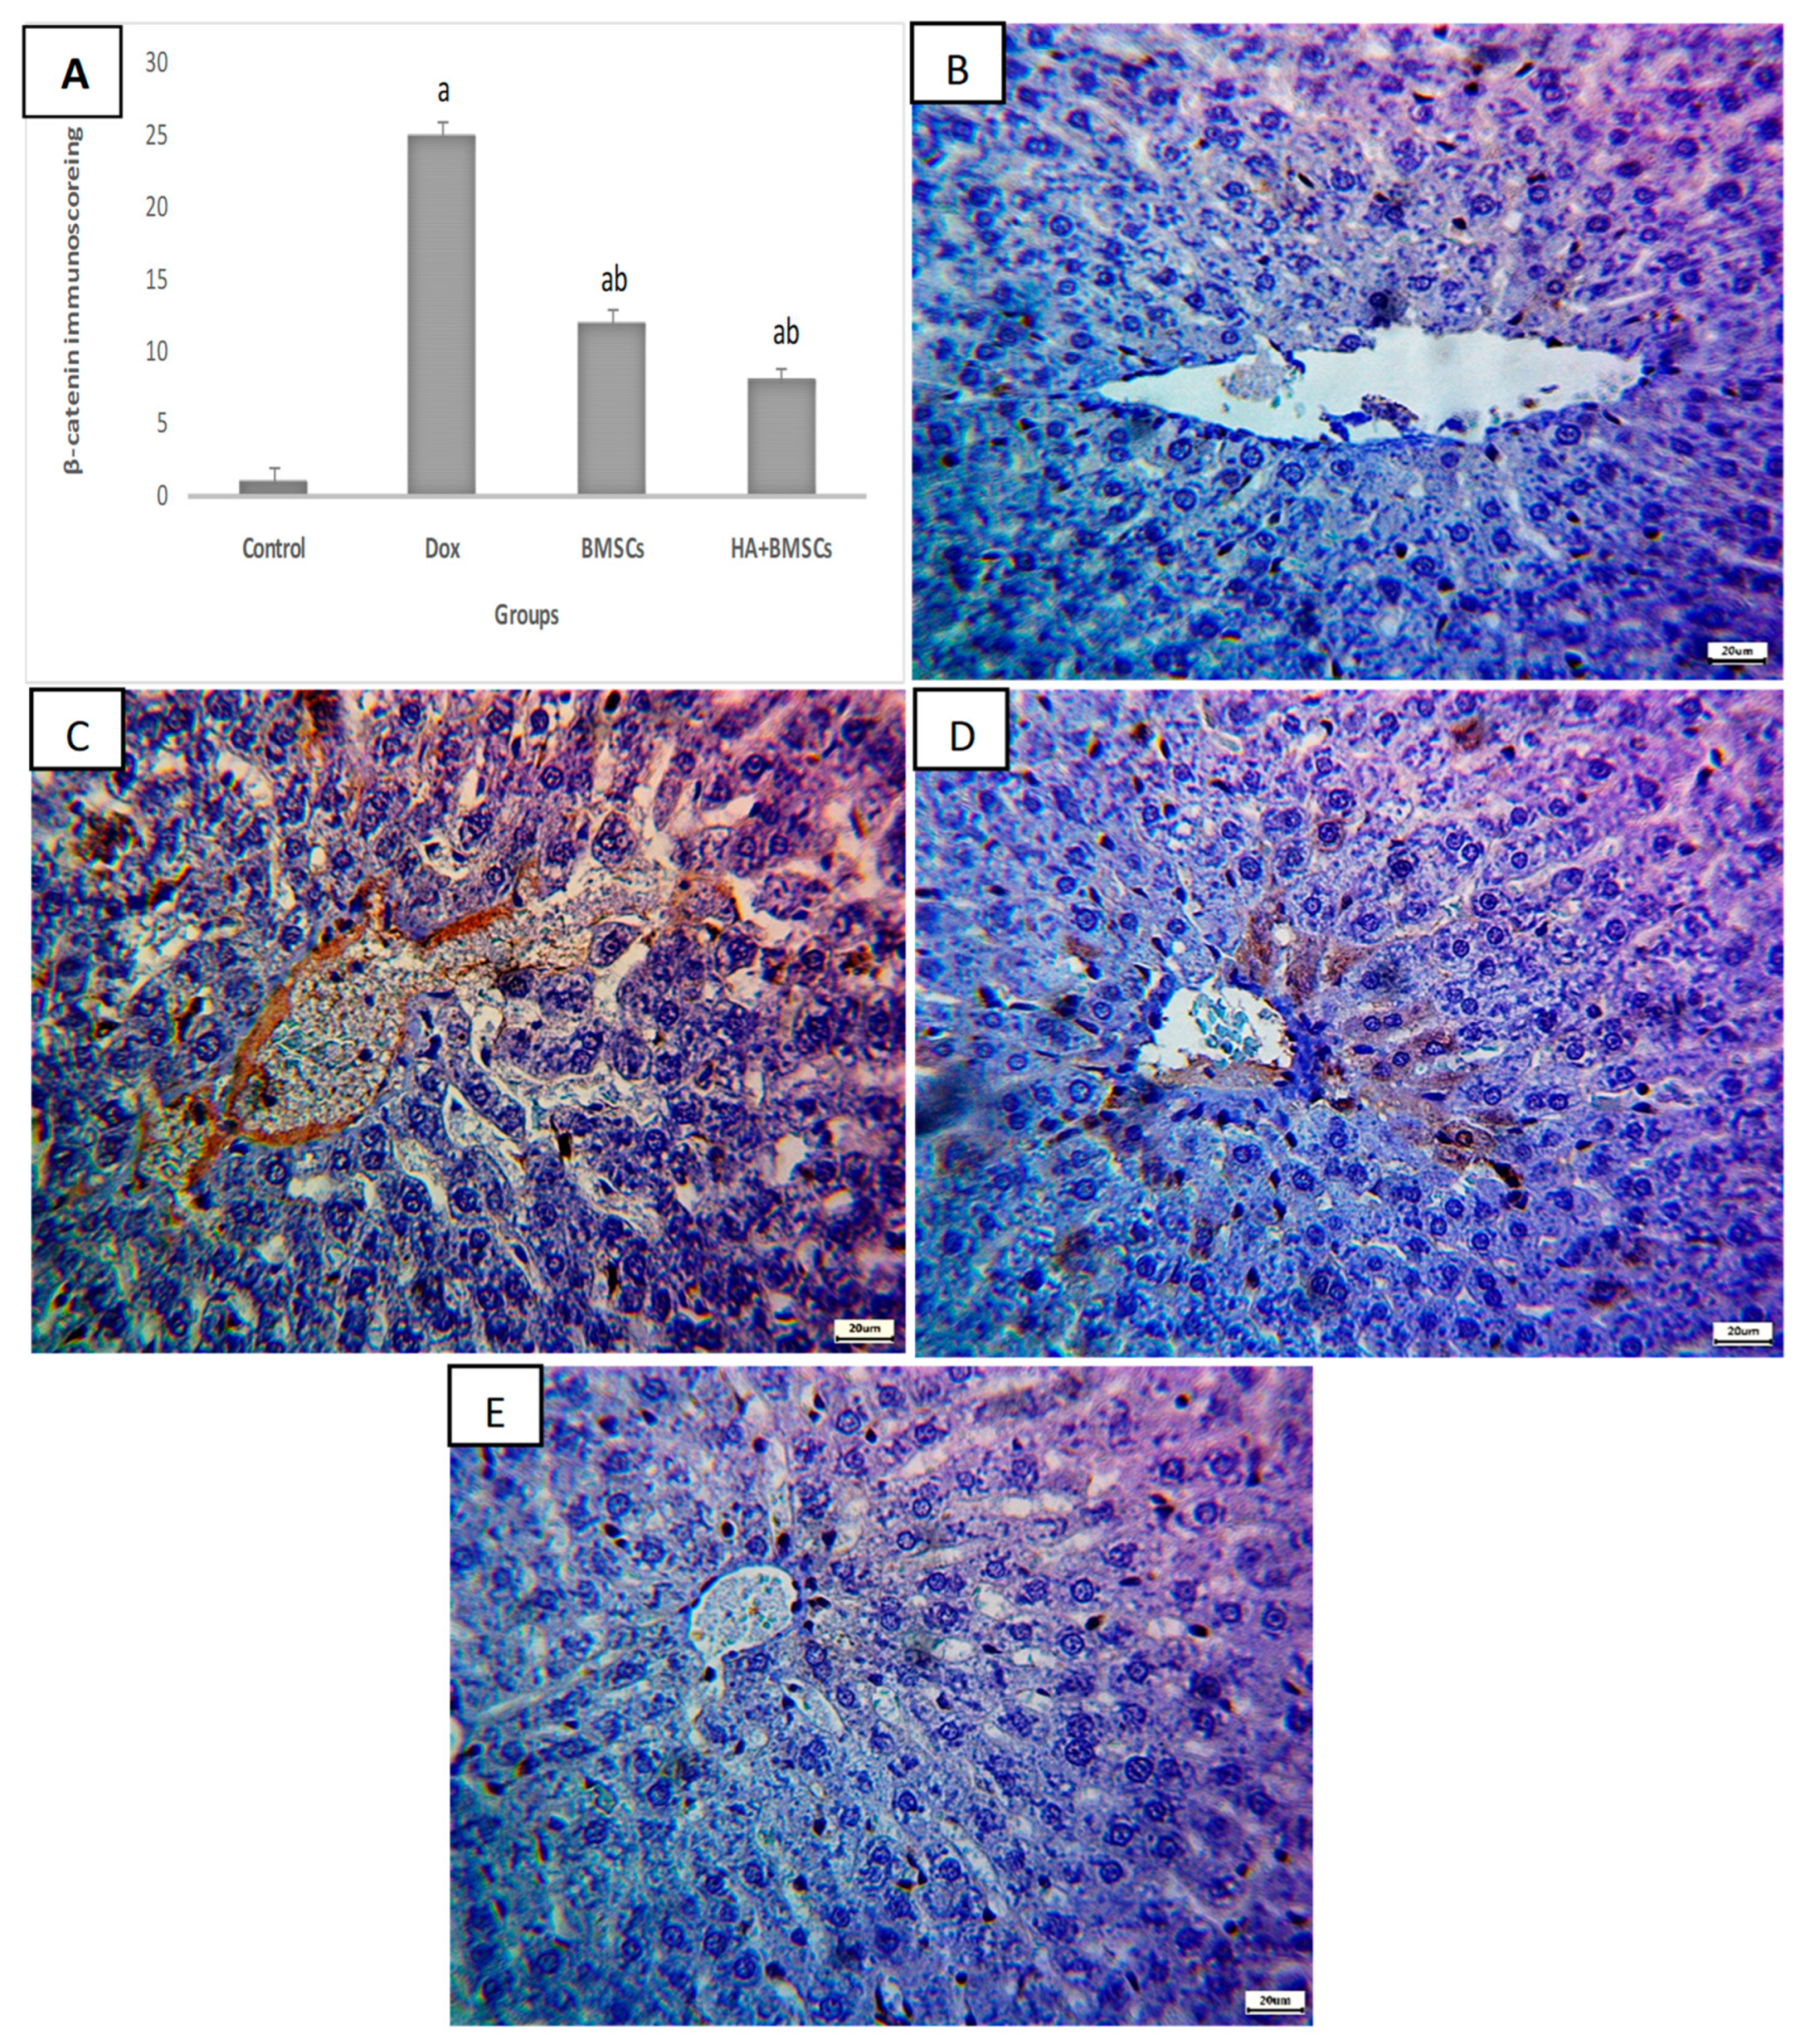 Cells | Free Full-Text | Hepatoprotective Effects of Hyaluronic  Acid-Preconditioned Bone Marrow Mesenchymal Stem Cells against Liver  Toxicity via the Inhibition of Apoptosis and the Wnt/&beta;-Catenin  Signaling Pathway